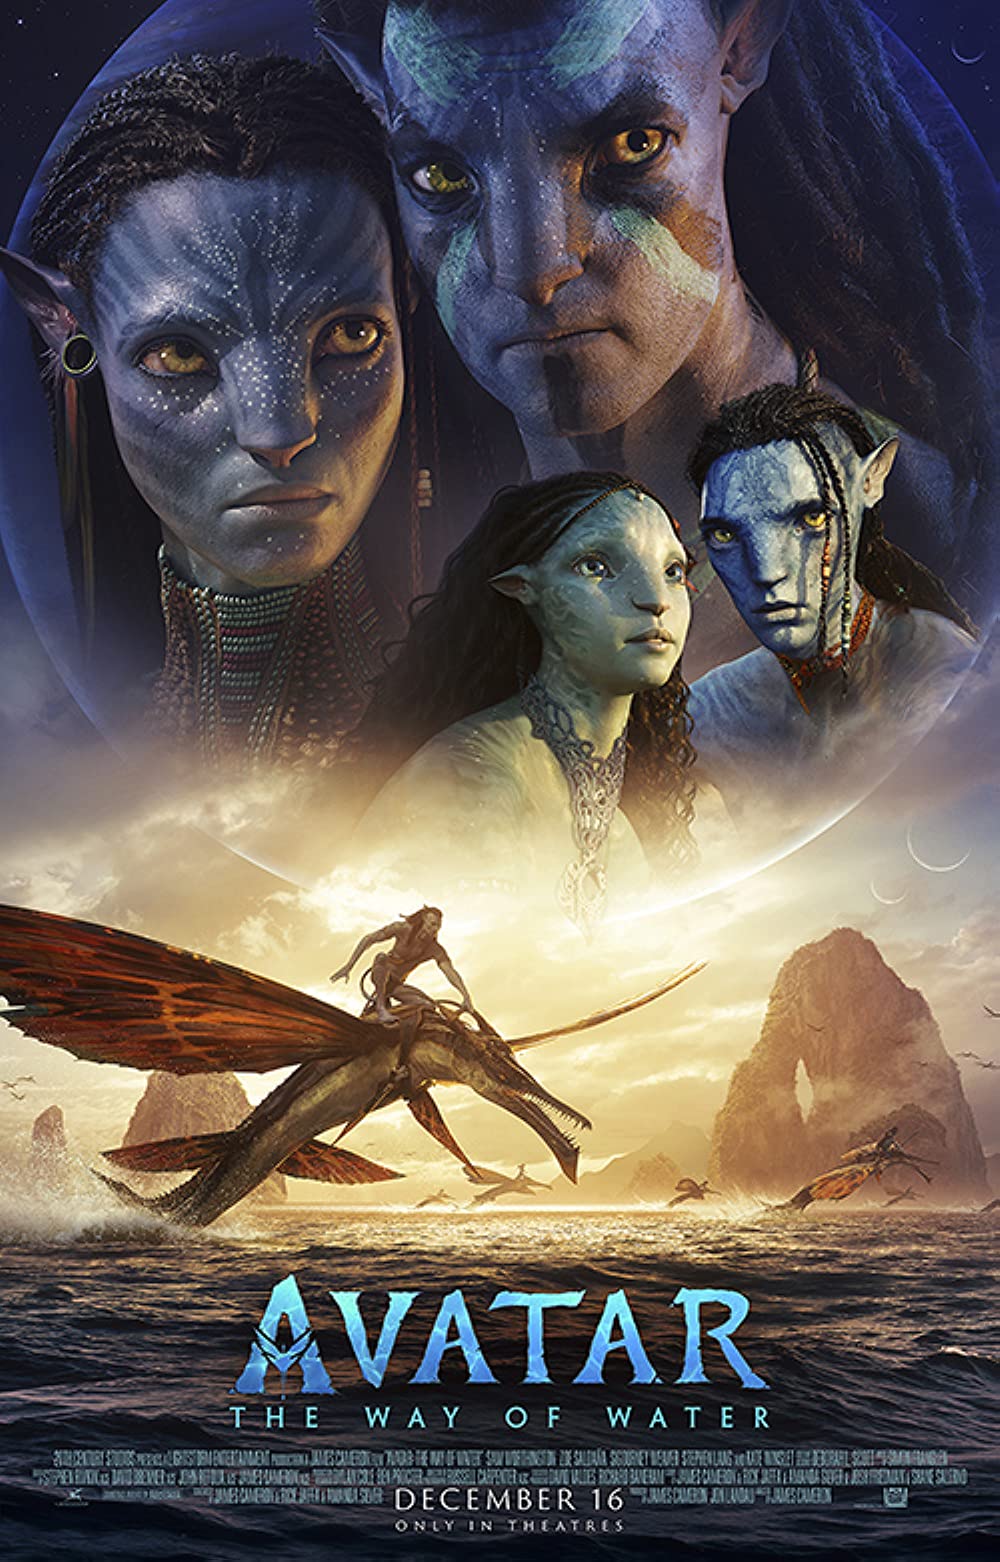 Avatar The Way of Water 2022 Hindi Dubbed Official Trailer 1080p | 720p HDRip 51MB Download